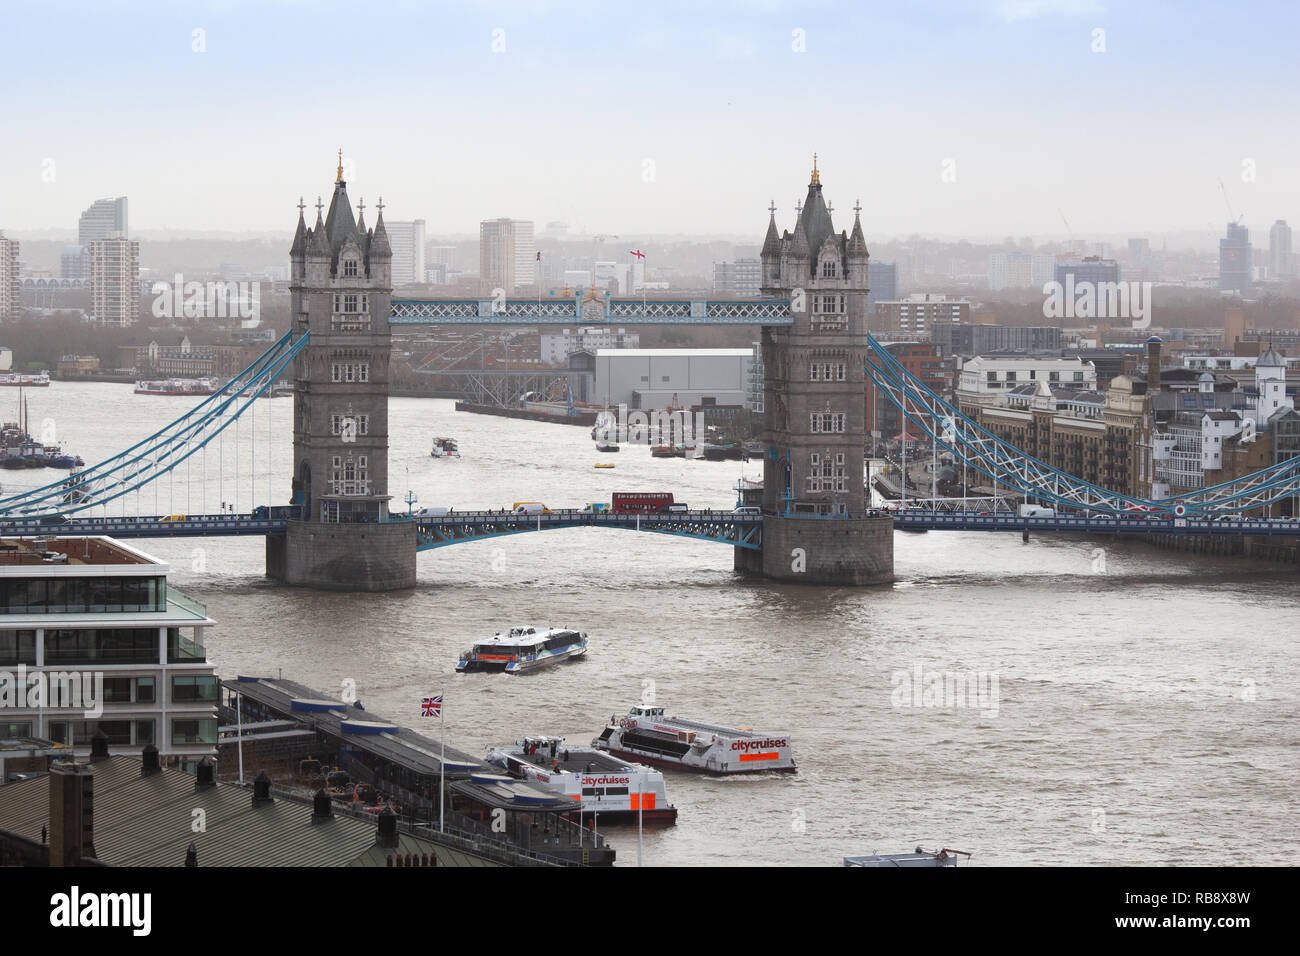 The Tower Bridge over the River Thames, London. Stock Photo